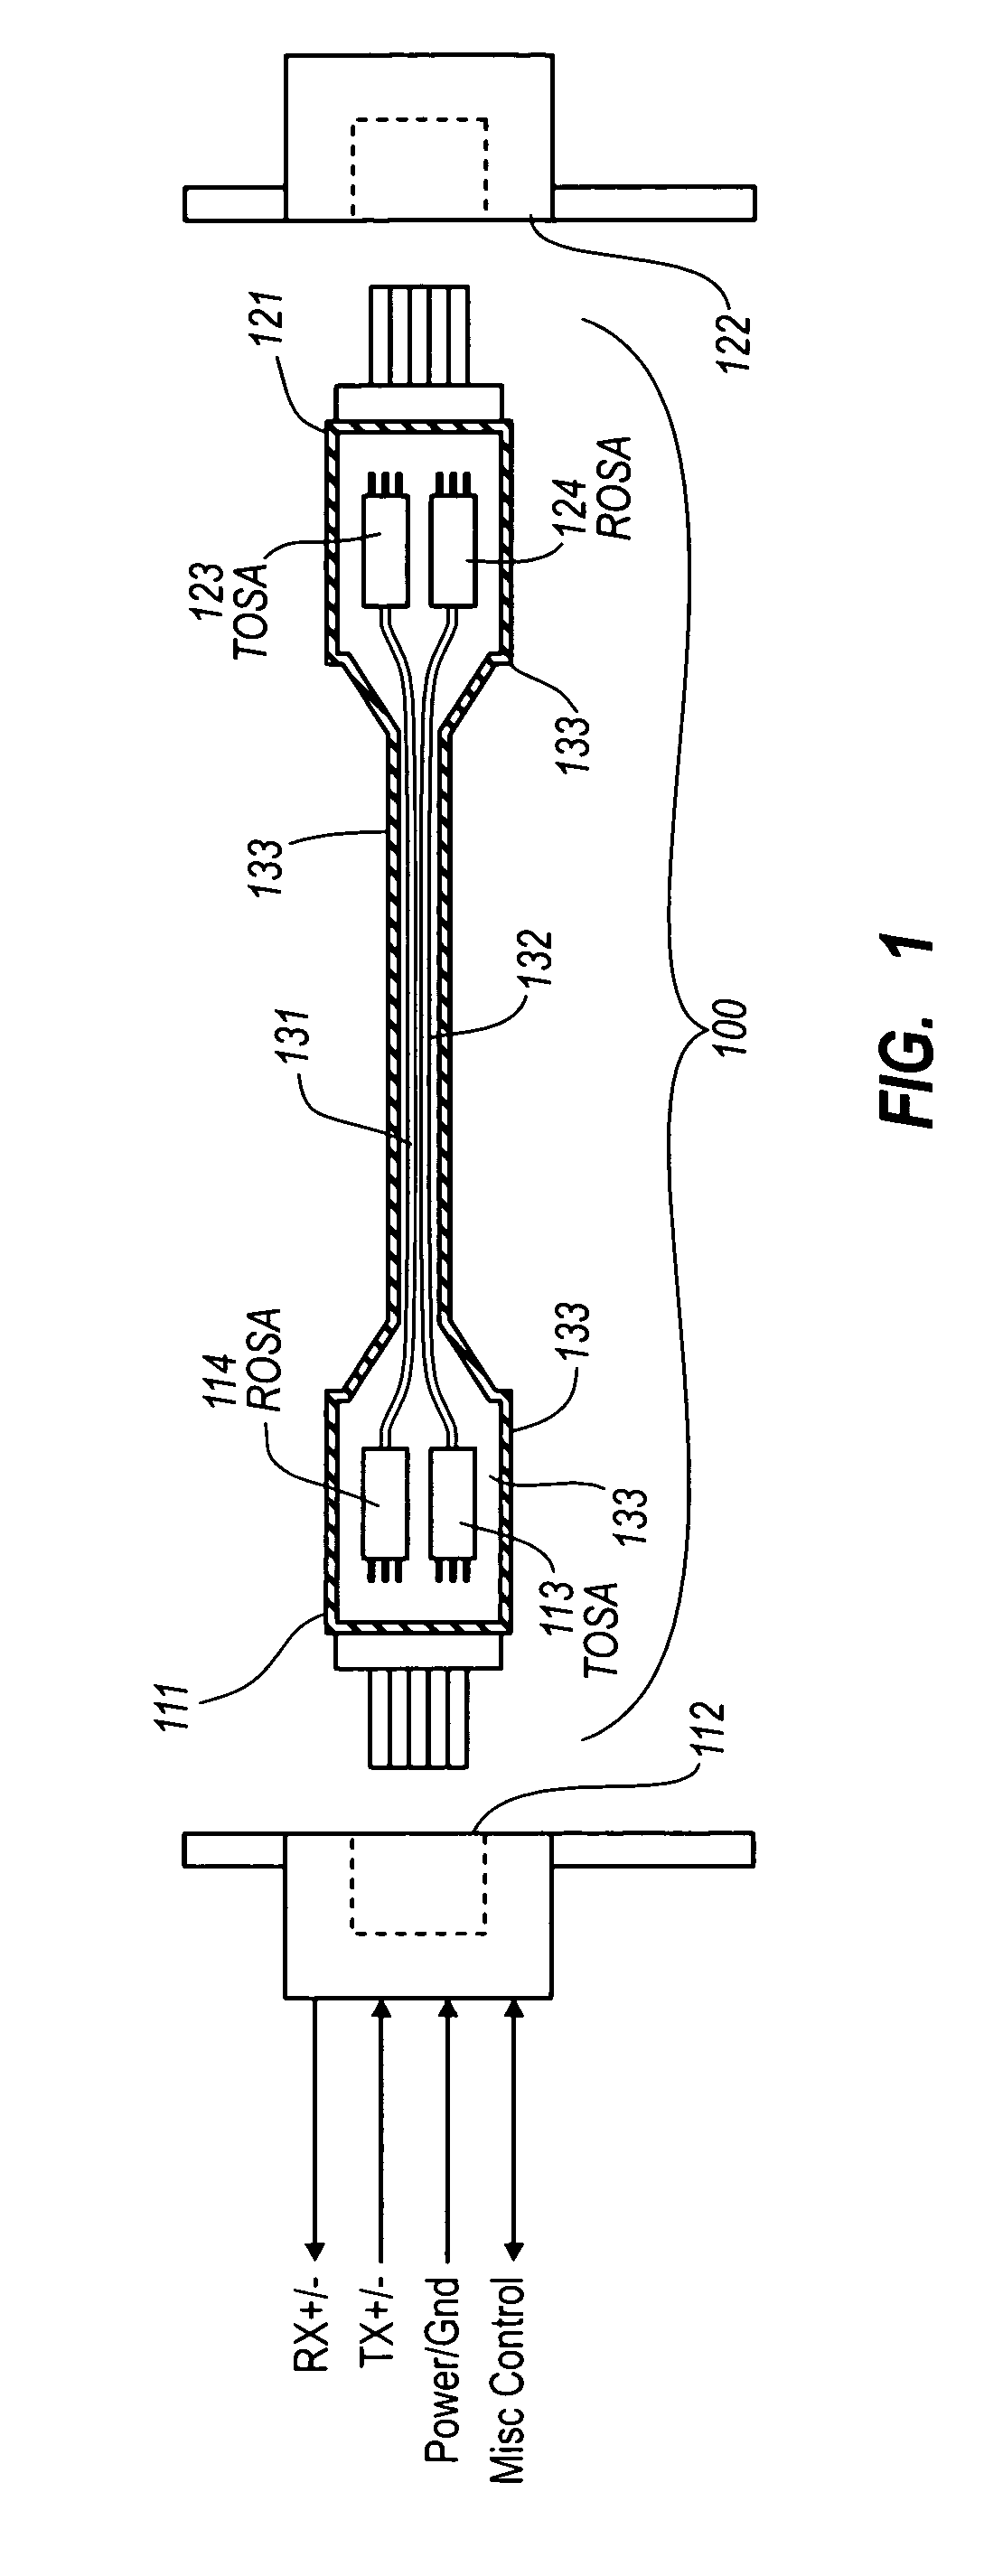 Active optical cable with integrated eye safety